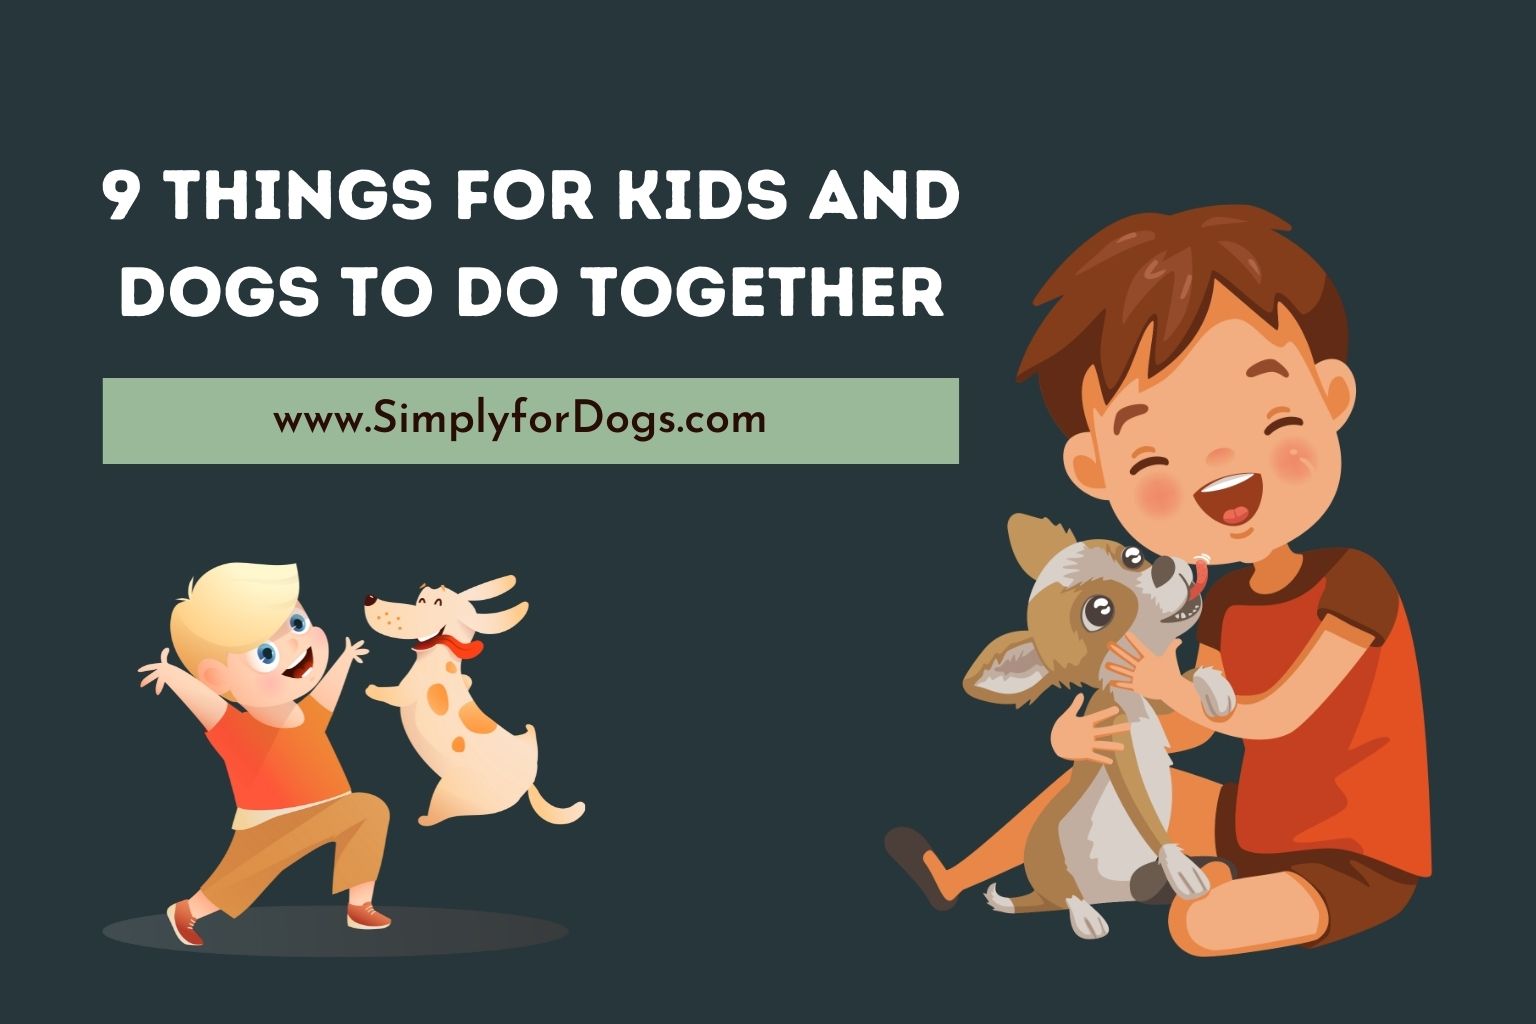 9 Things for Kids and Dogs to Do Together